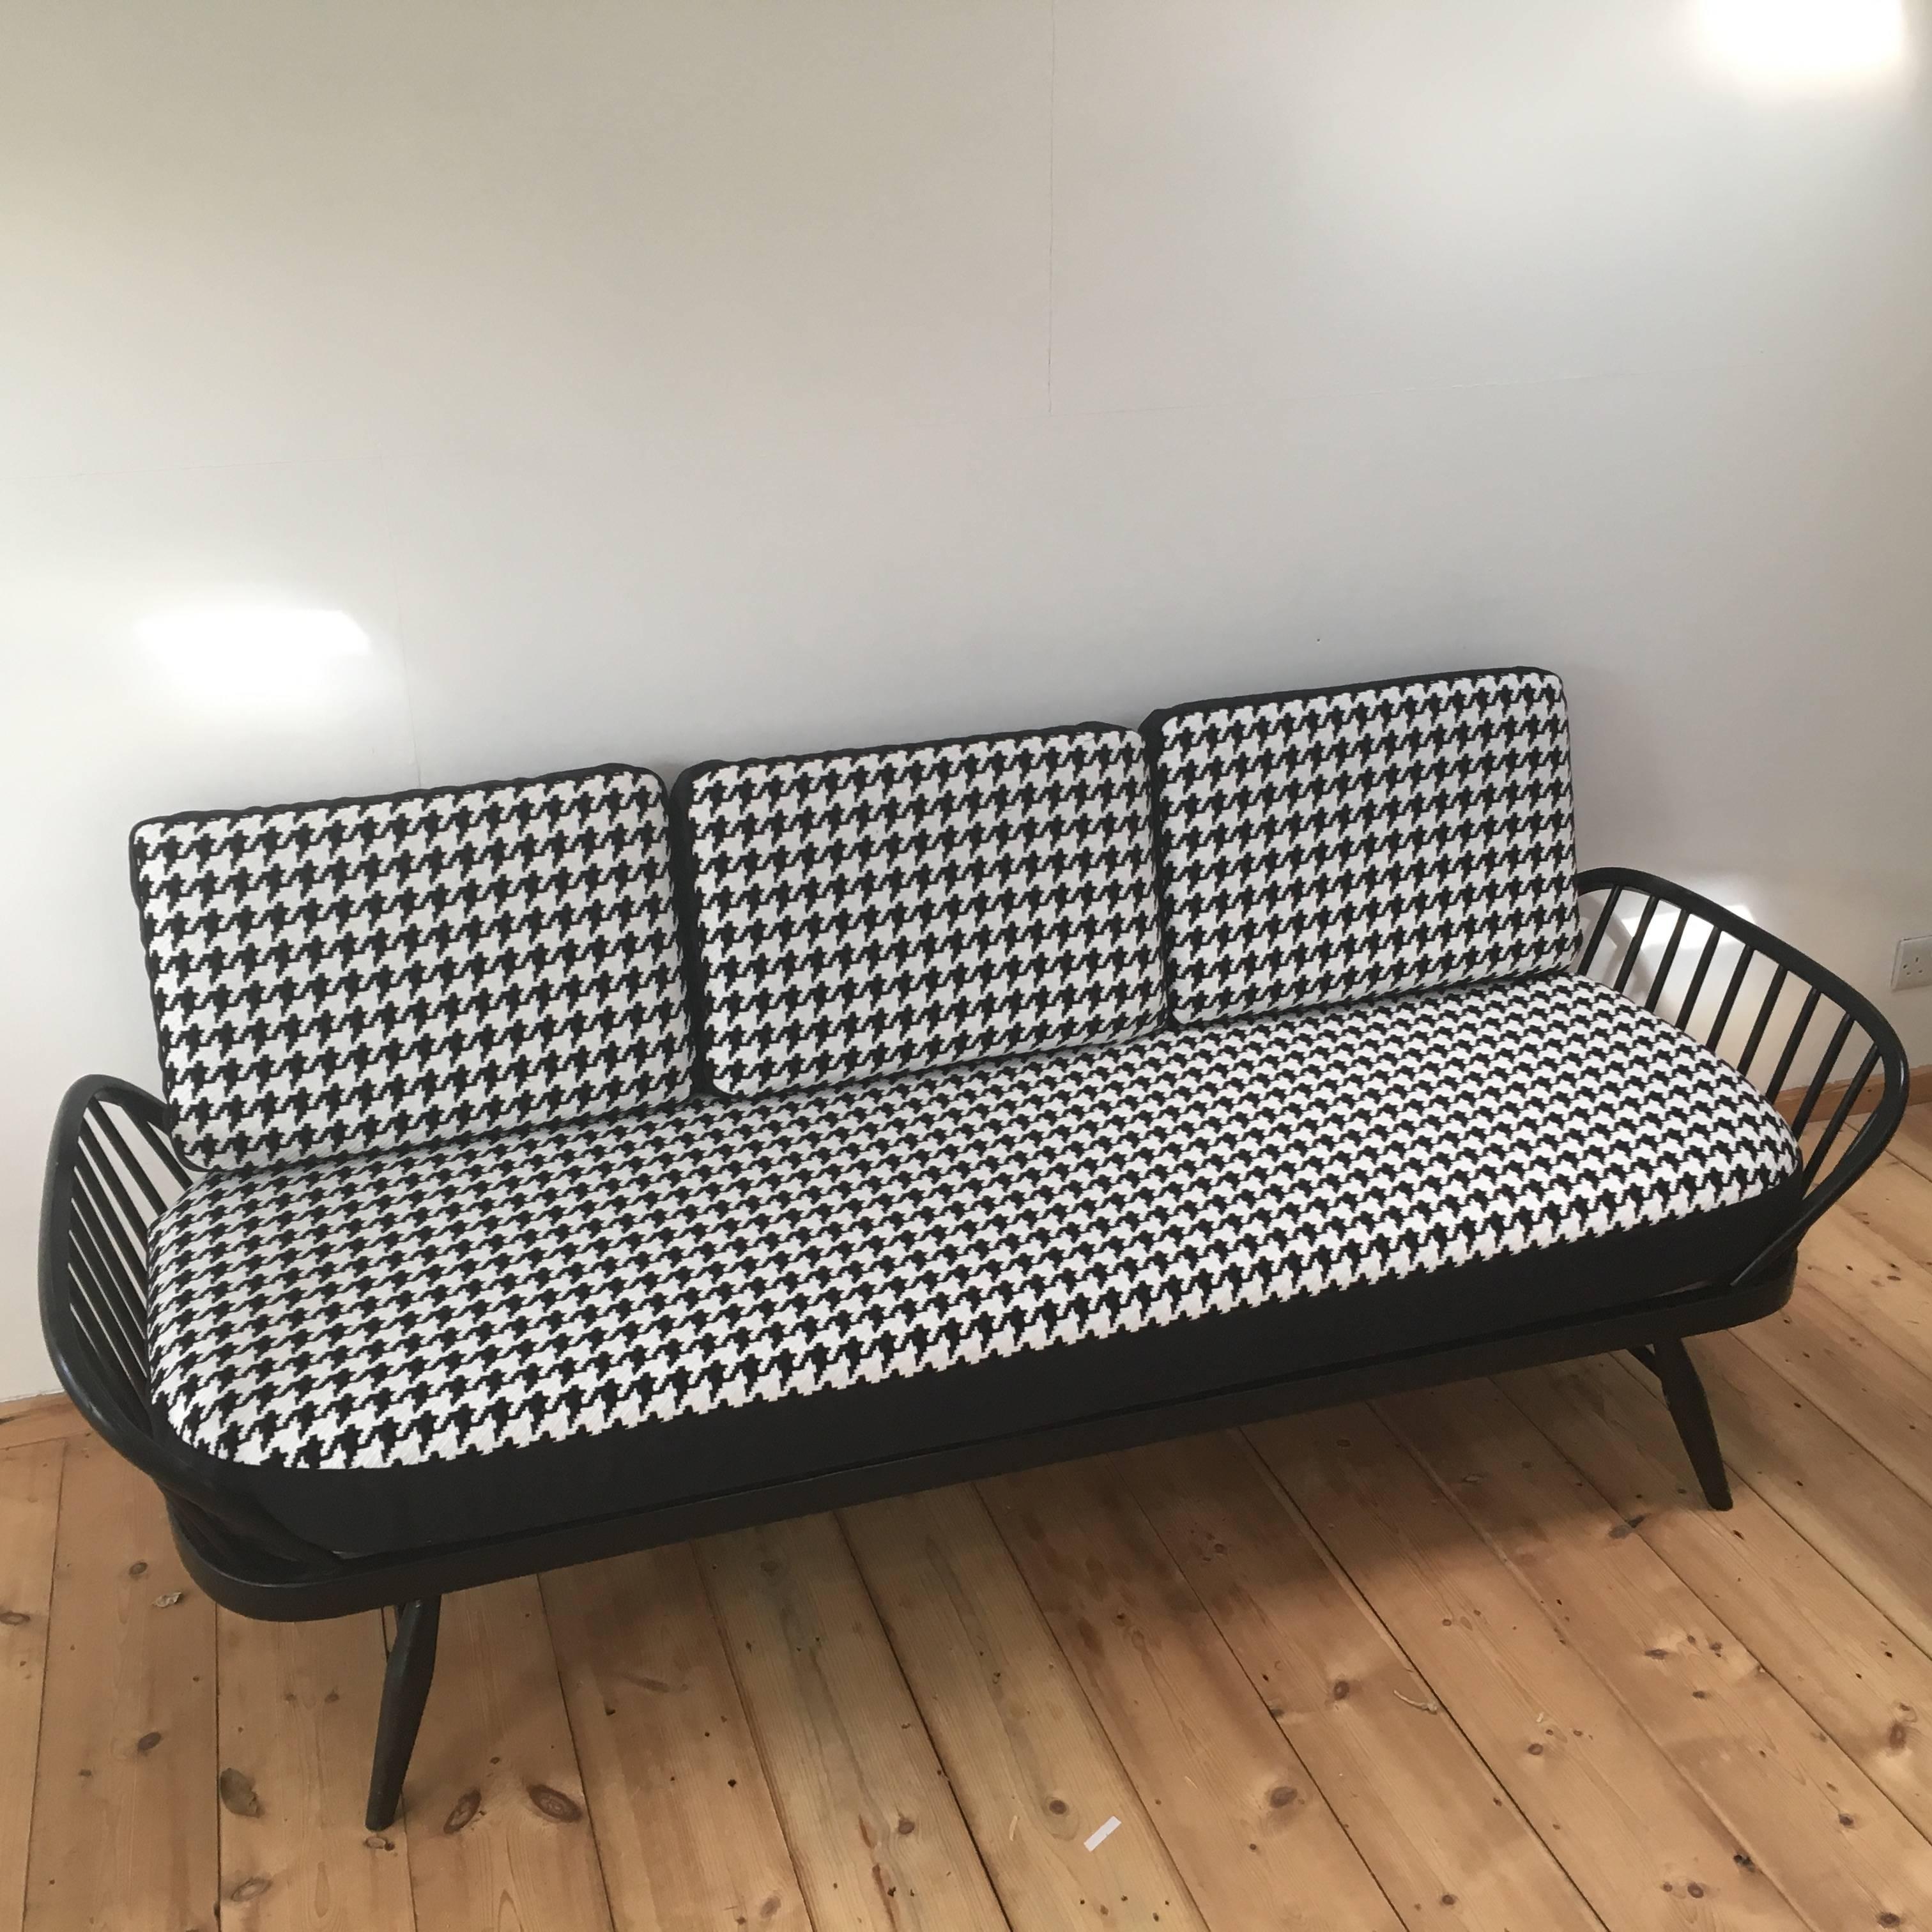 Mid-Century Modern Mid-Century Ercol Studio Couch Refurbished in Dog Tooth Check Fabric, 1950s For Sale